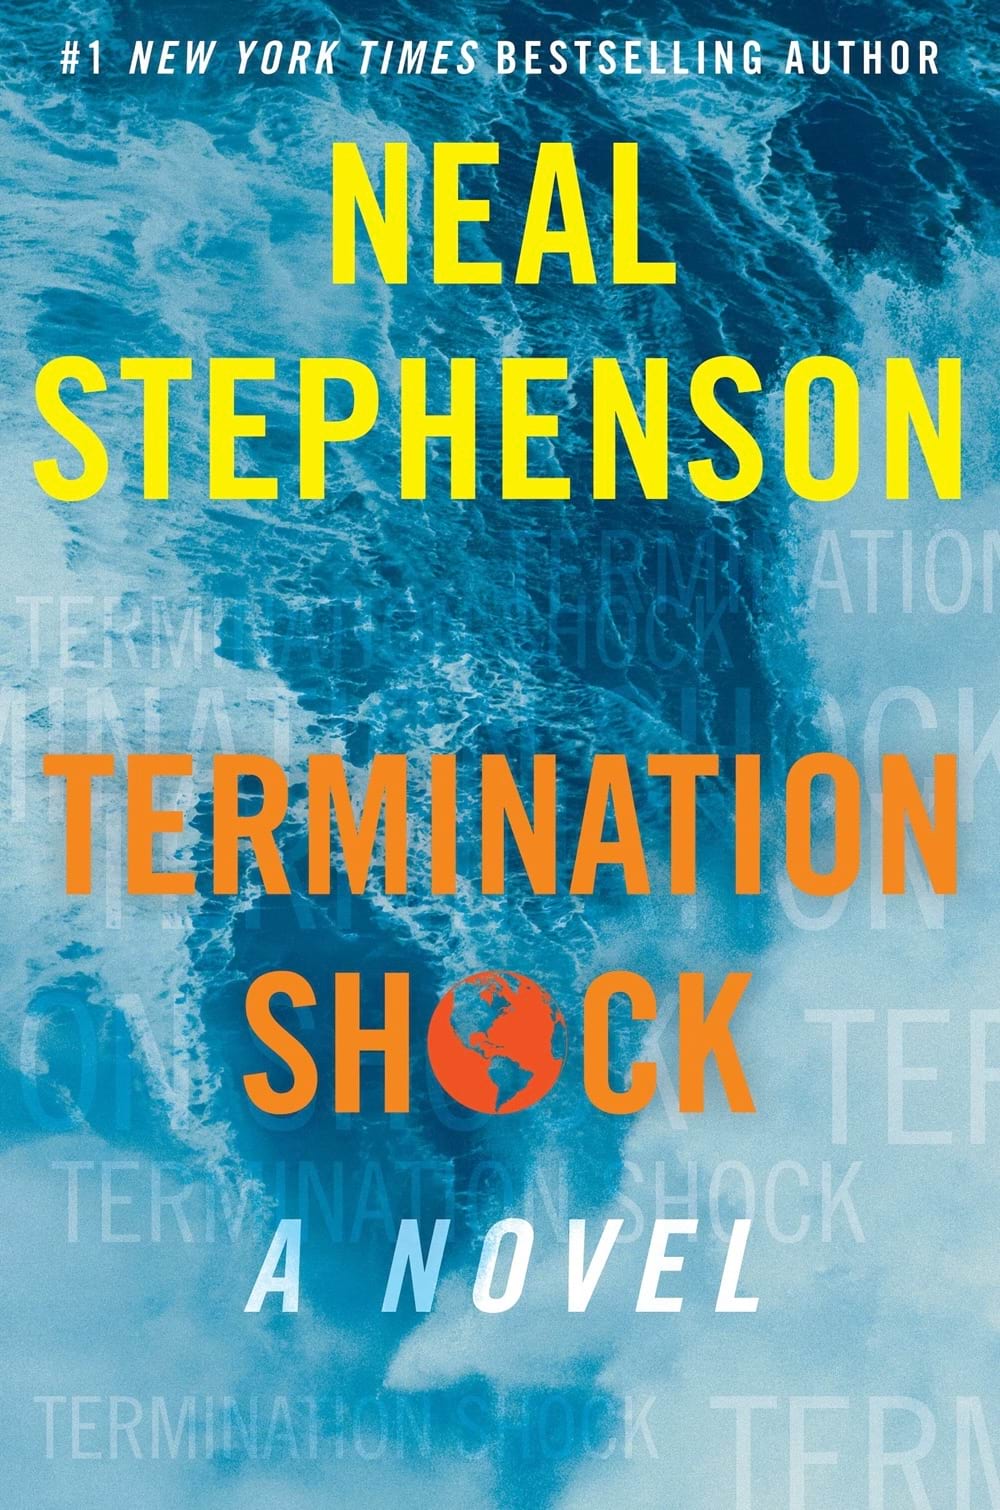 The cover of Termination Shock